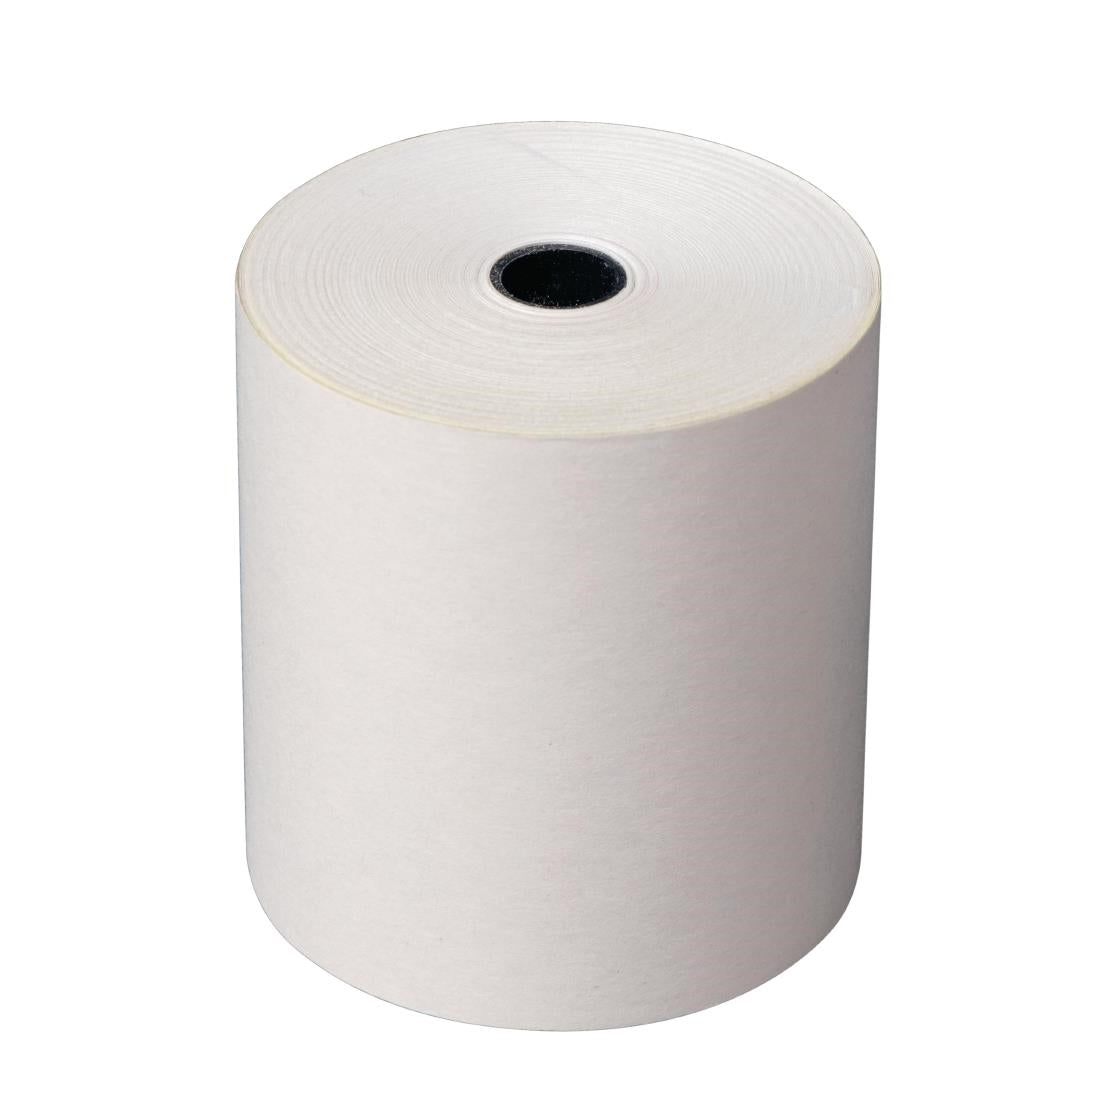 Fiesta Non-Thermal 2ply White and Yellow Till Roll 76 x 70mm (Pack of 20) JD Catering Equipment Solutions Ltd